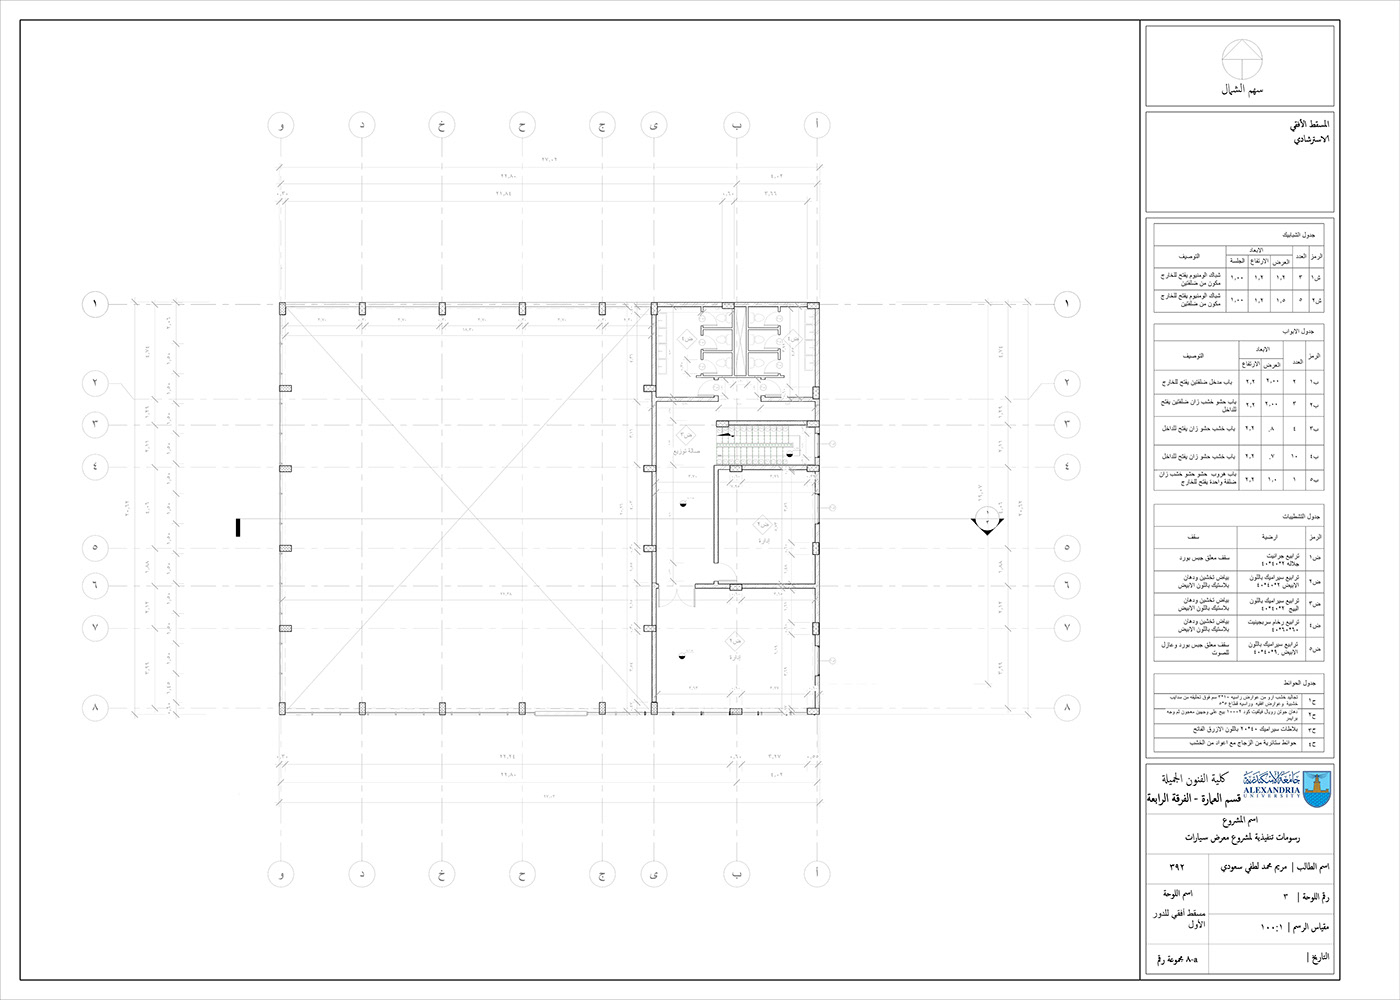 working drawings architecture Shop Drawings details